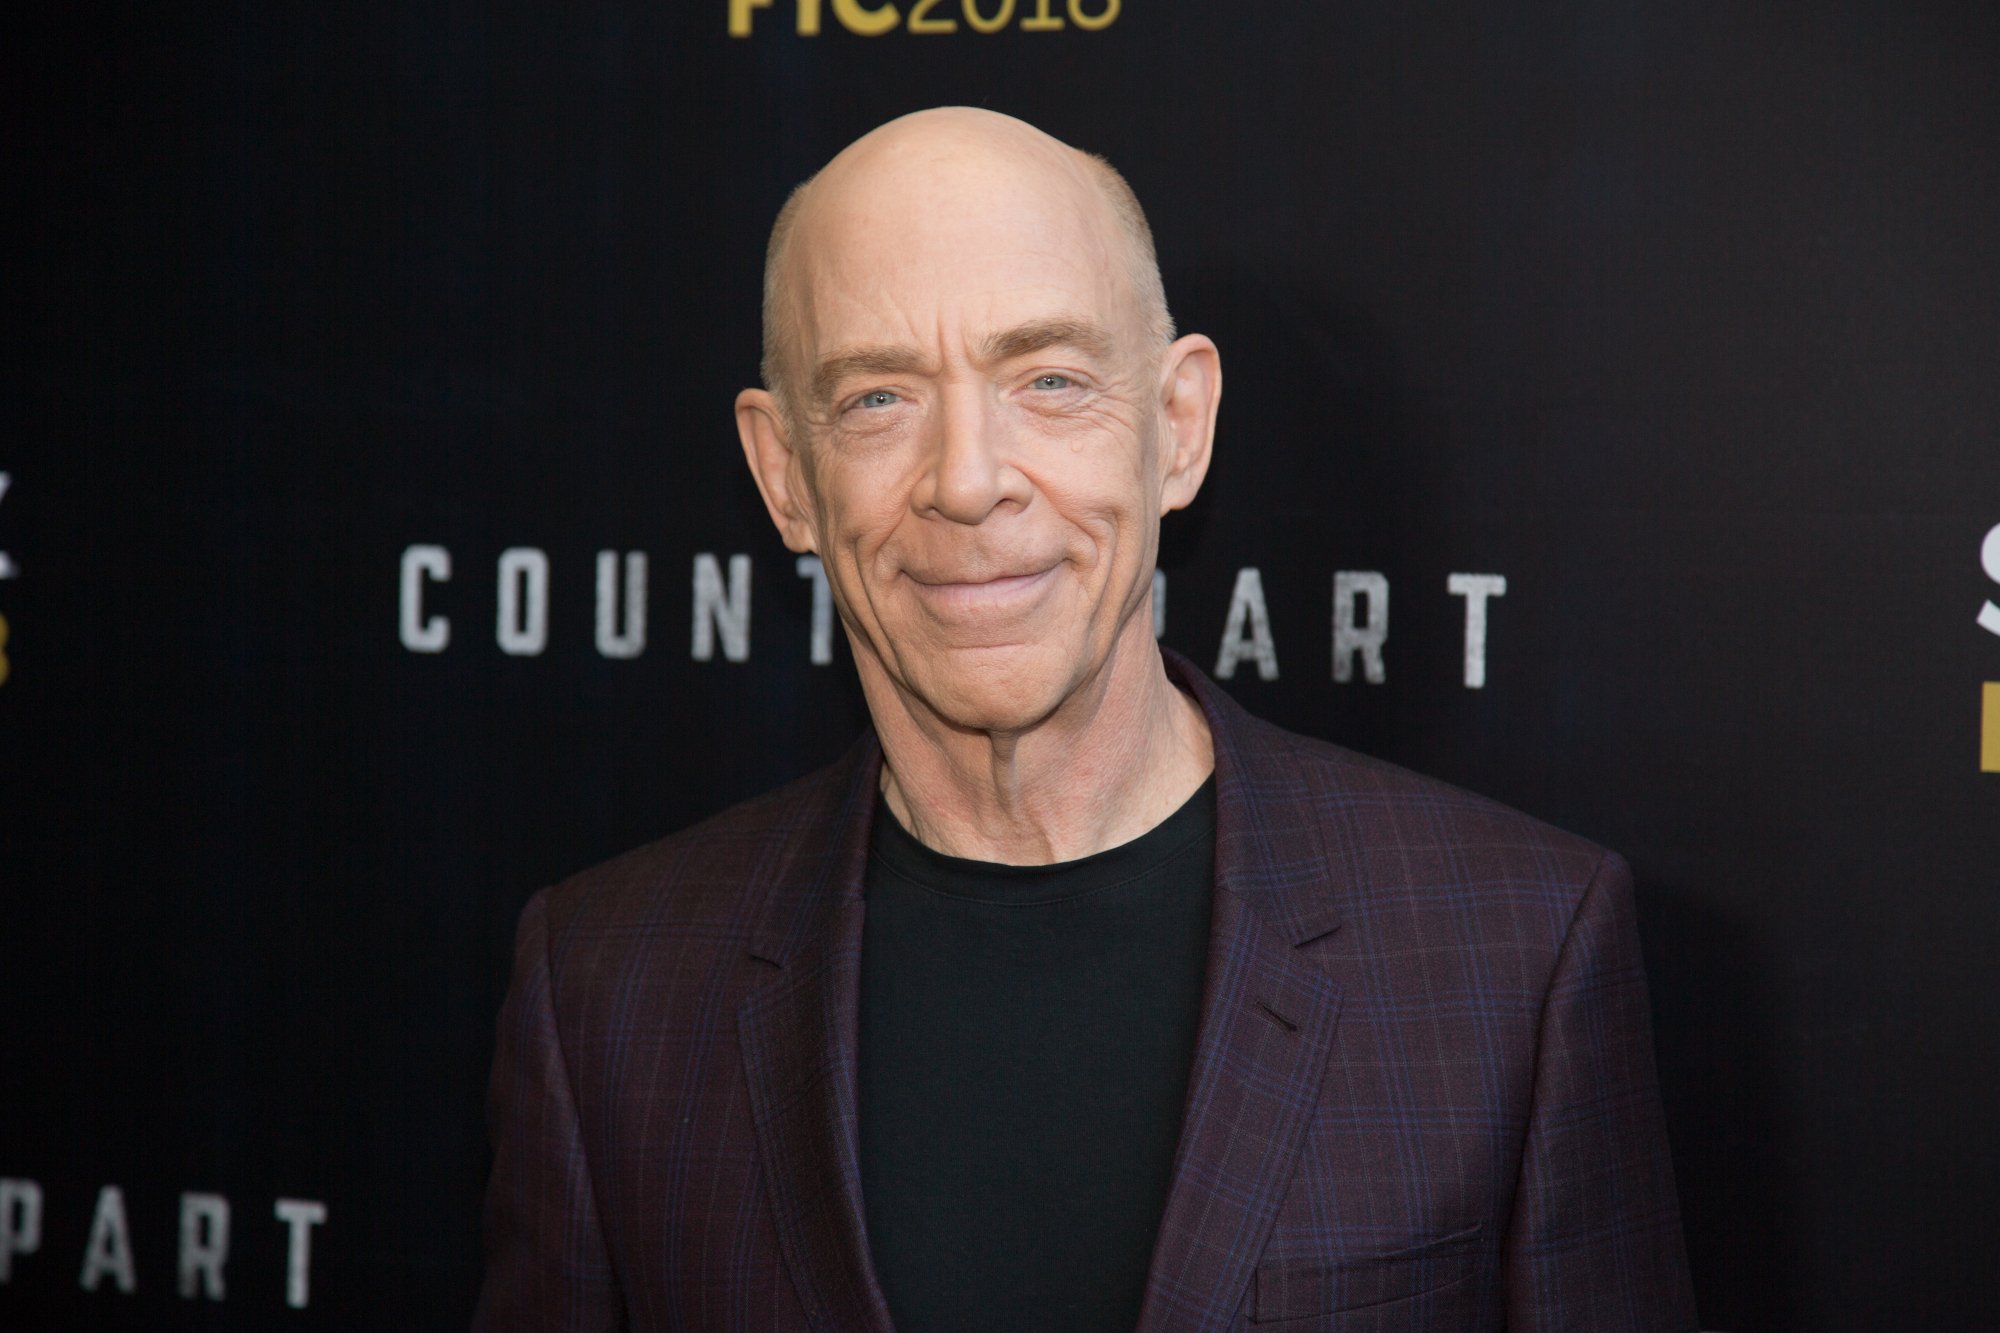 'Spider-Man' star J.K. Simmons, who plays J. Jonah Jameson in Sam Raimi's trilogy. He's wearing a dark shirt and jacket and smiling at the camera.